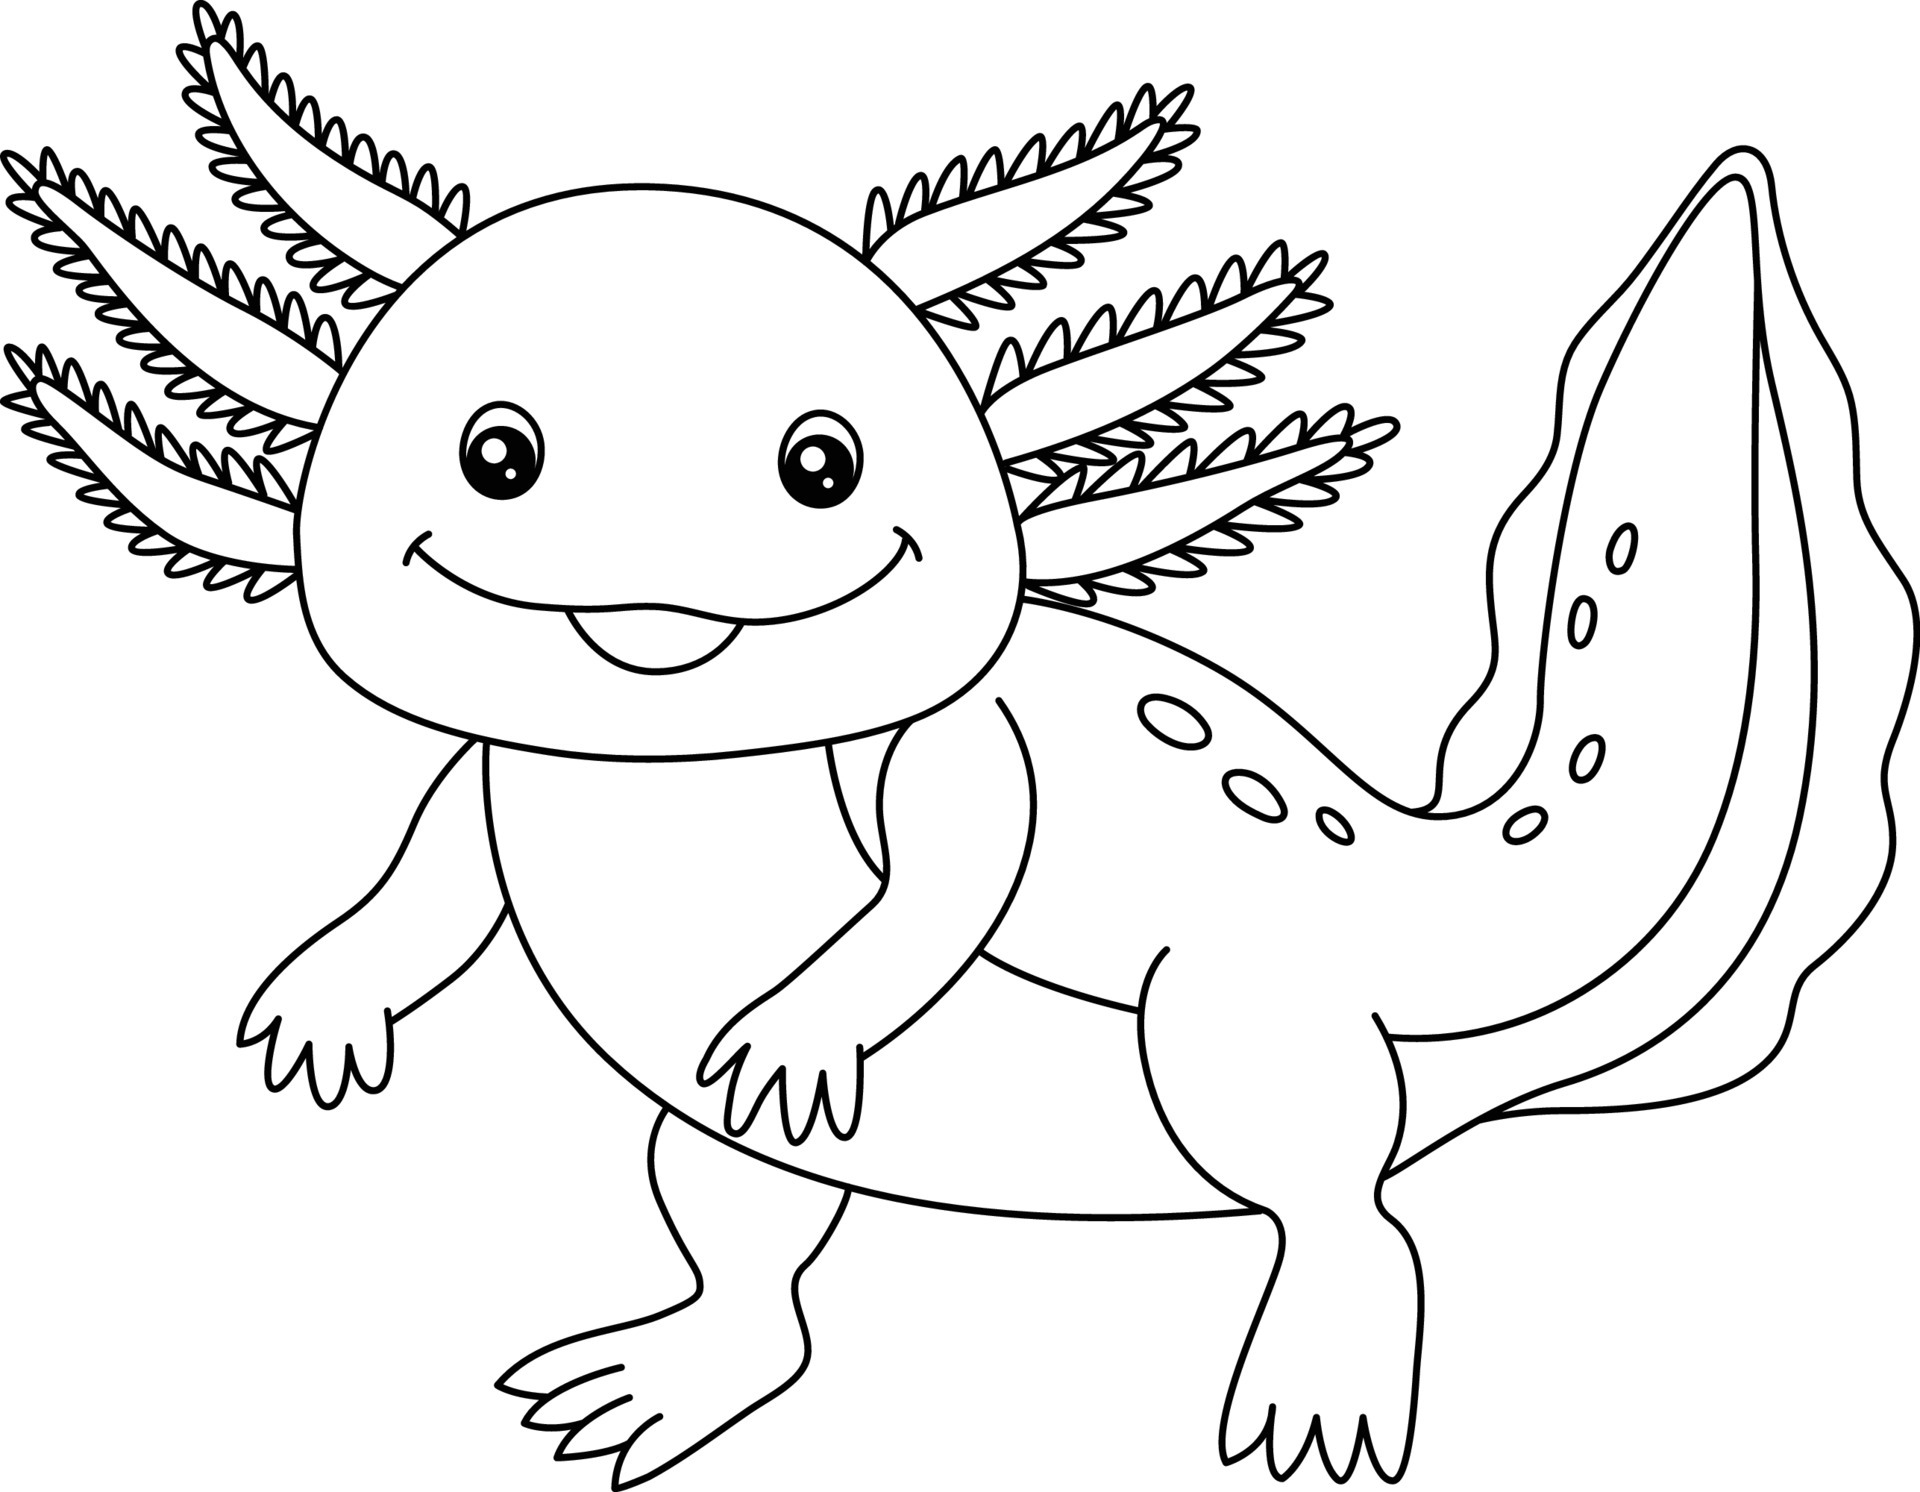 Axolotl Coloring Page Isolated for Kids 20 Vector Art at Vecteezy